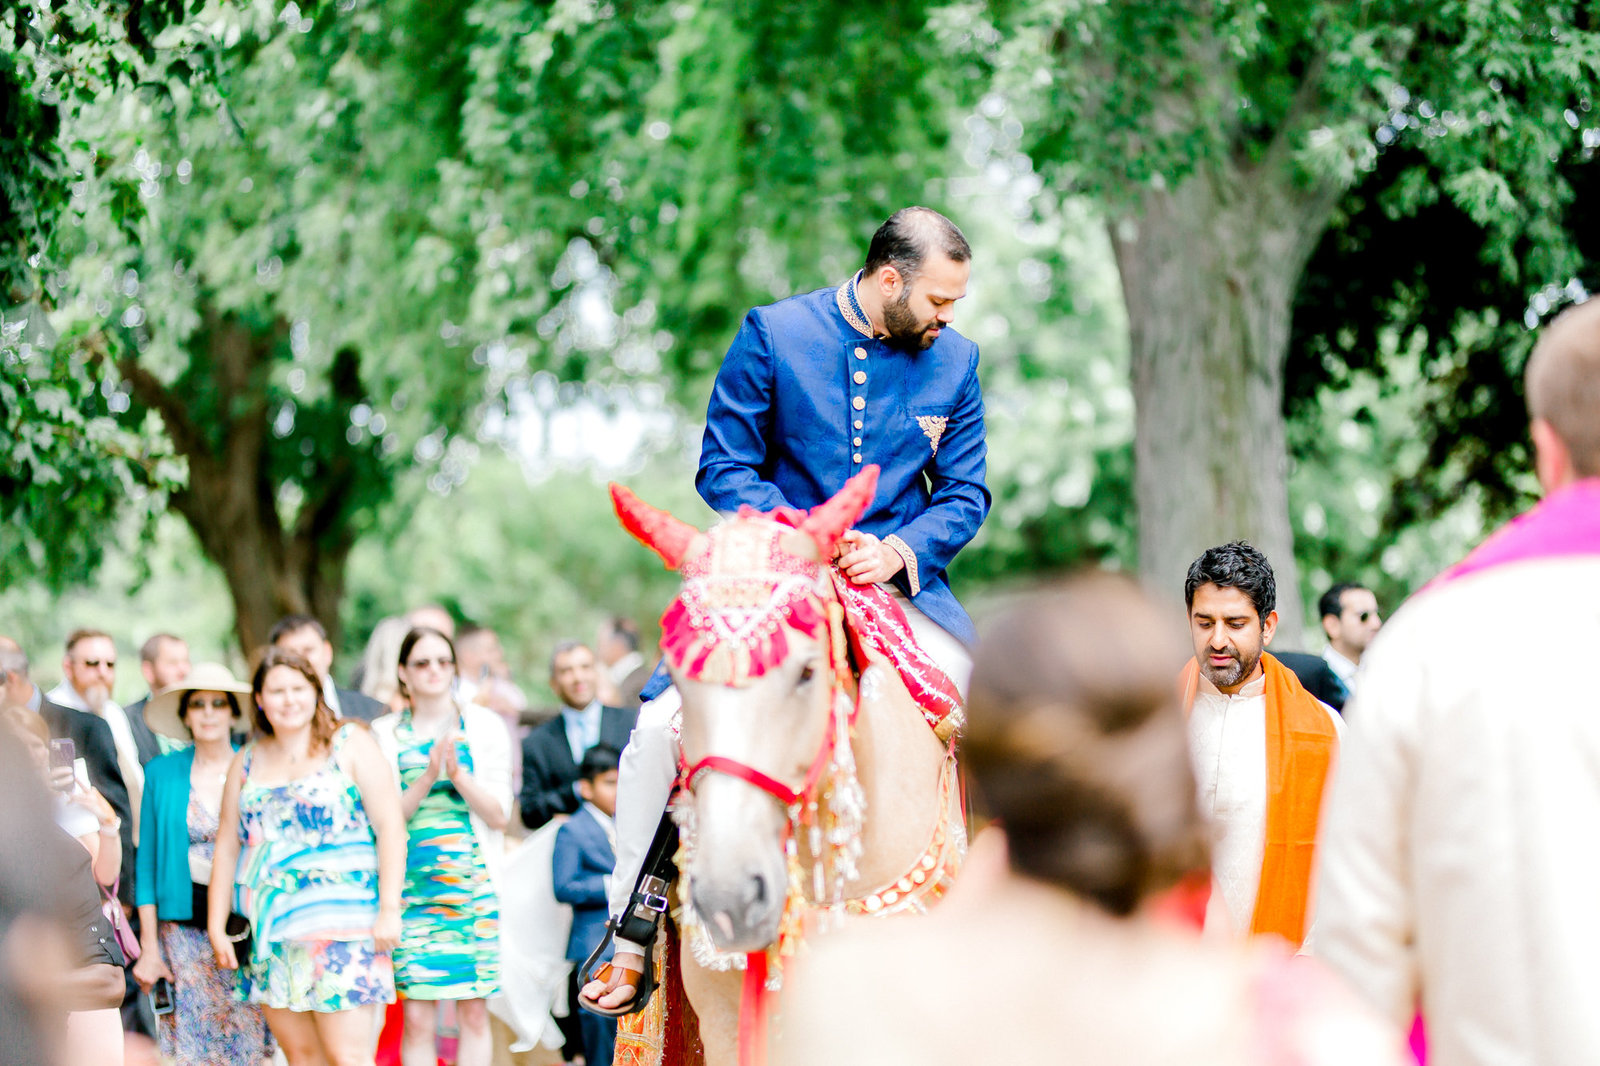 groom riding on the horse Chicago wedding pictures by Chicago wedding photographer bozena voytko